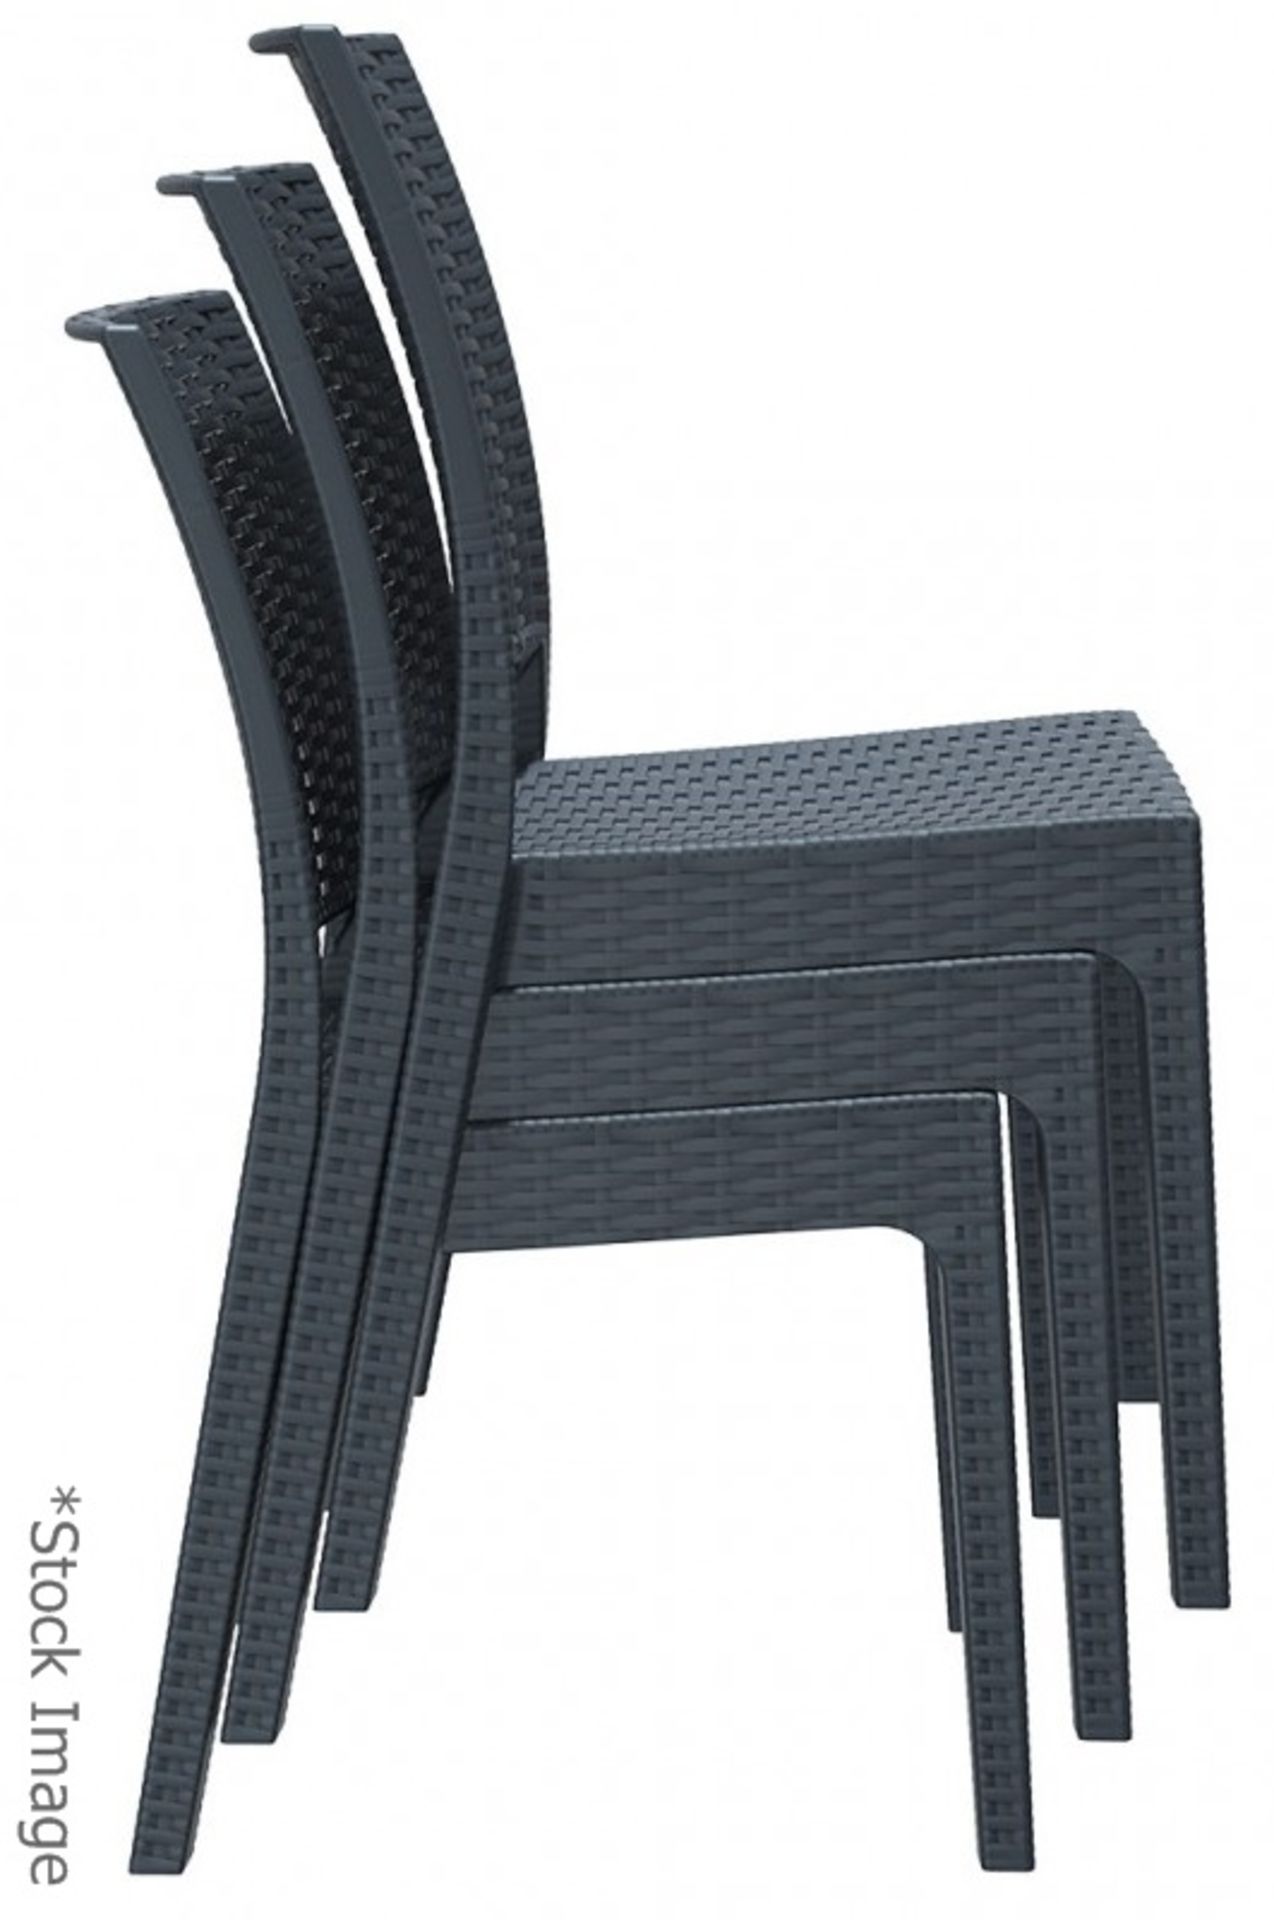 8 x SIESTA EXCLUSIVE 'Florida' Commercial Stackable Rattan-style Chairs In Dark Grey - Image 12 of 13